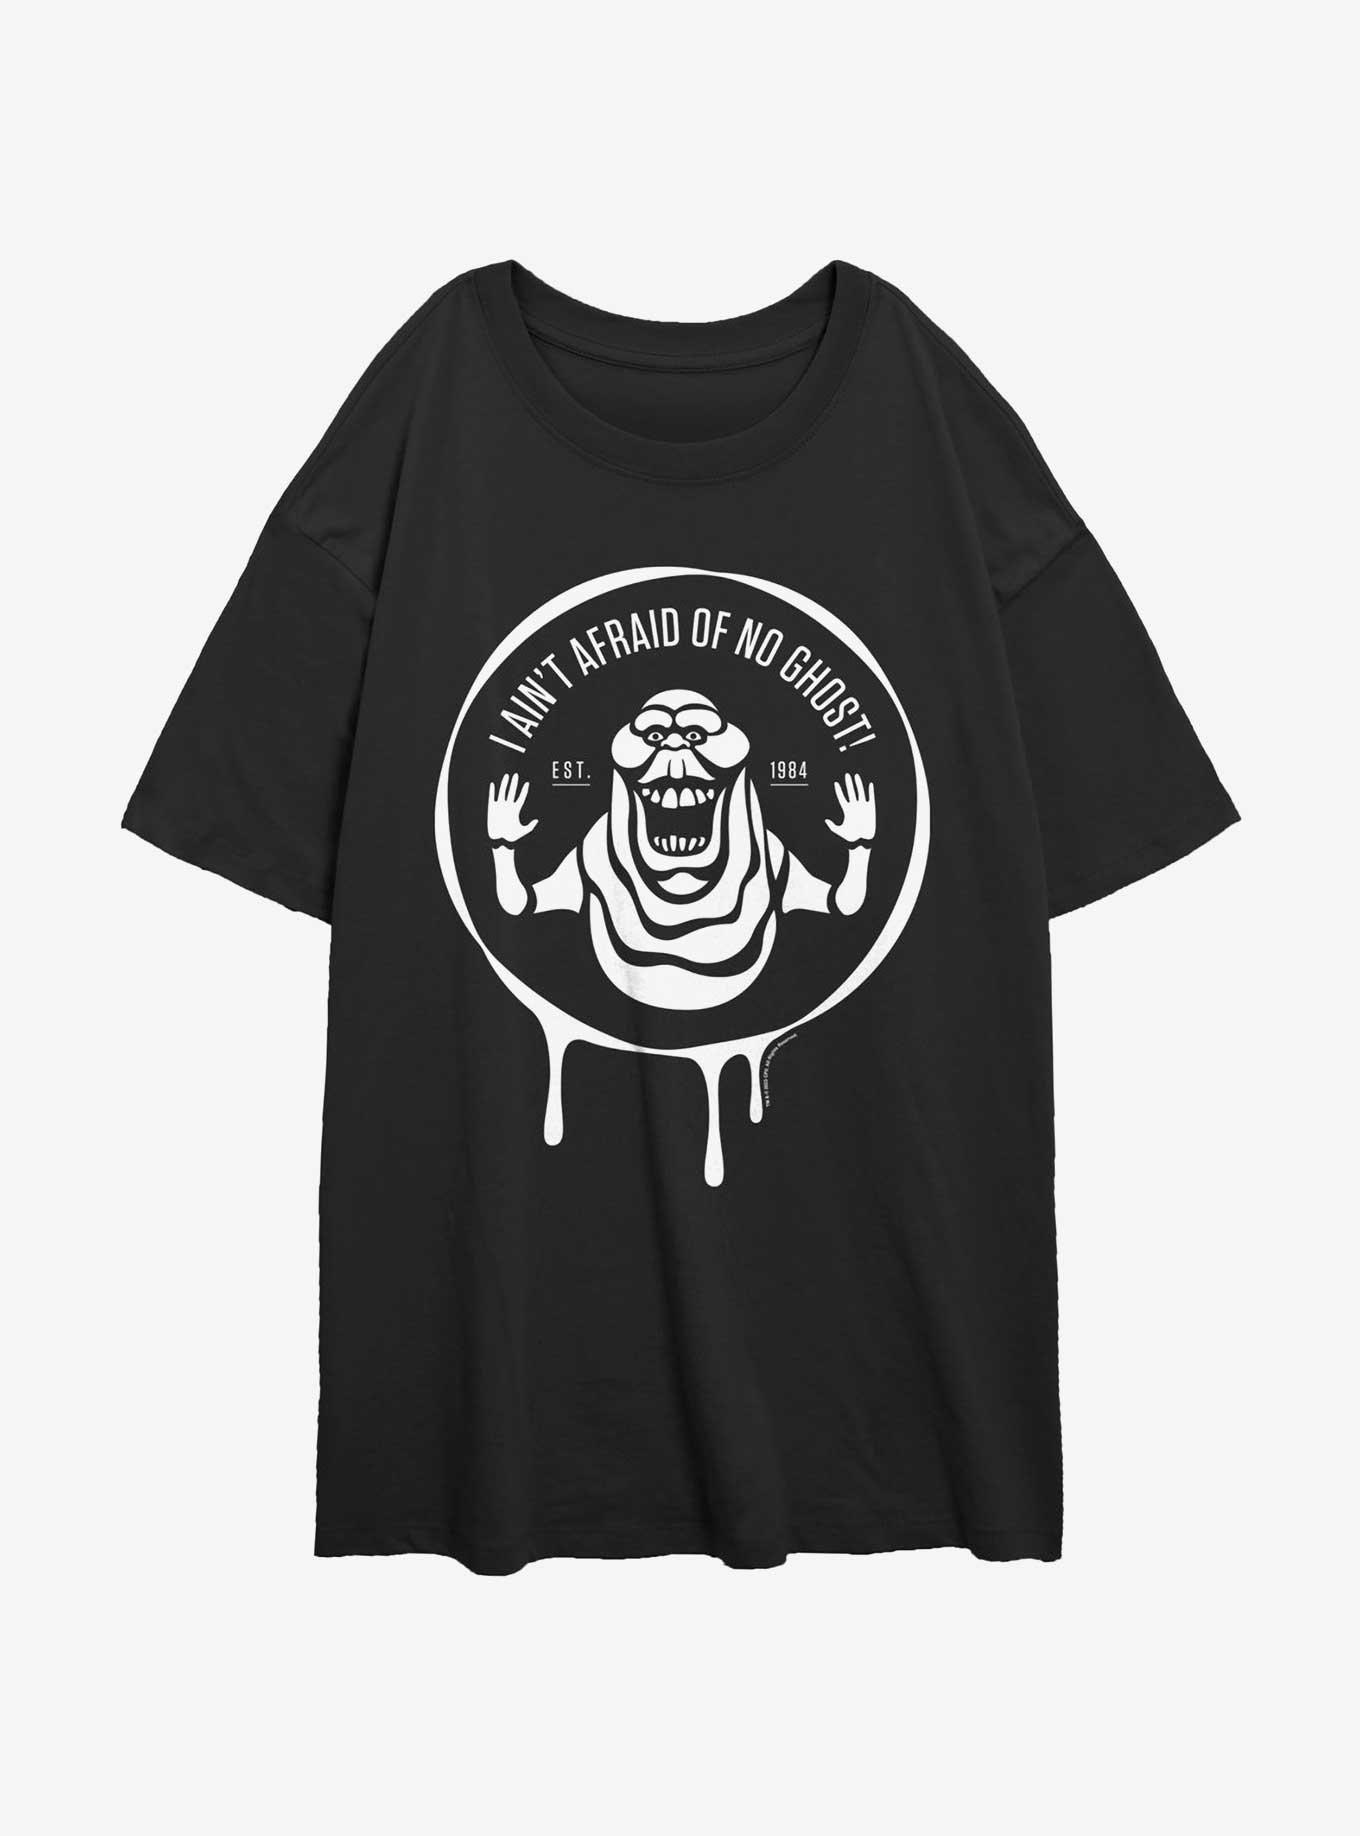 Ghostbusters 1984 Ain't Afraid Of No Ghost Badge Girls Oversized T-Shirt